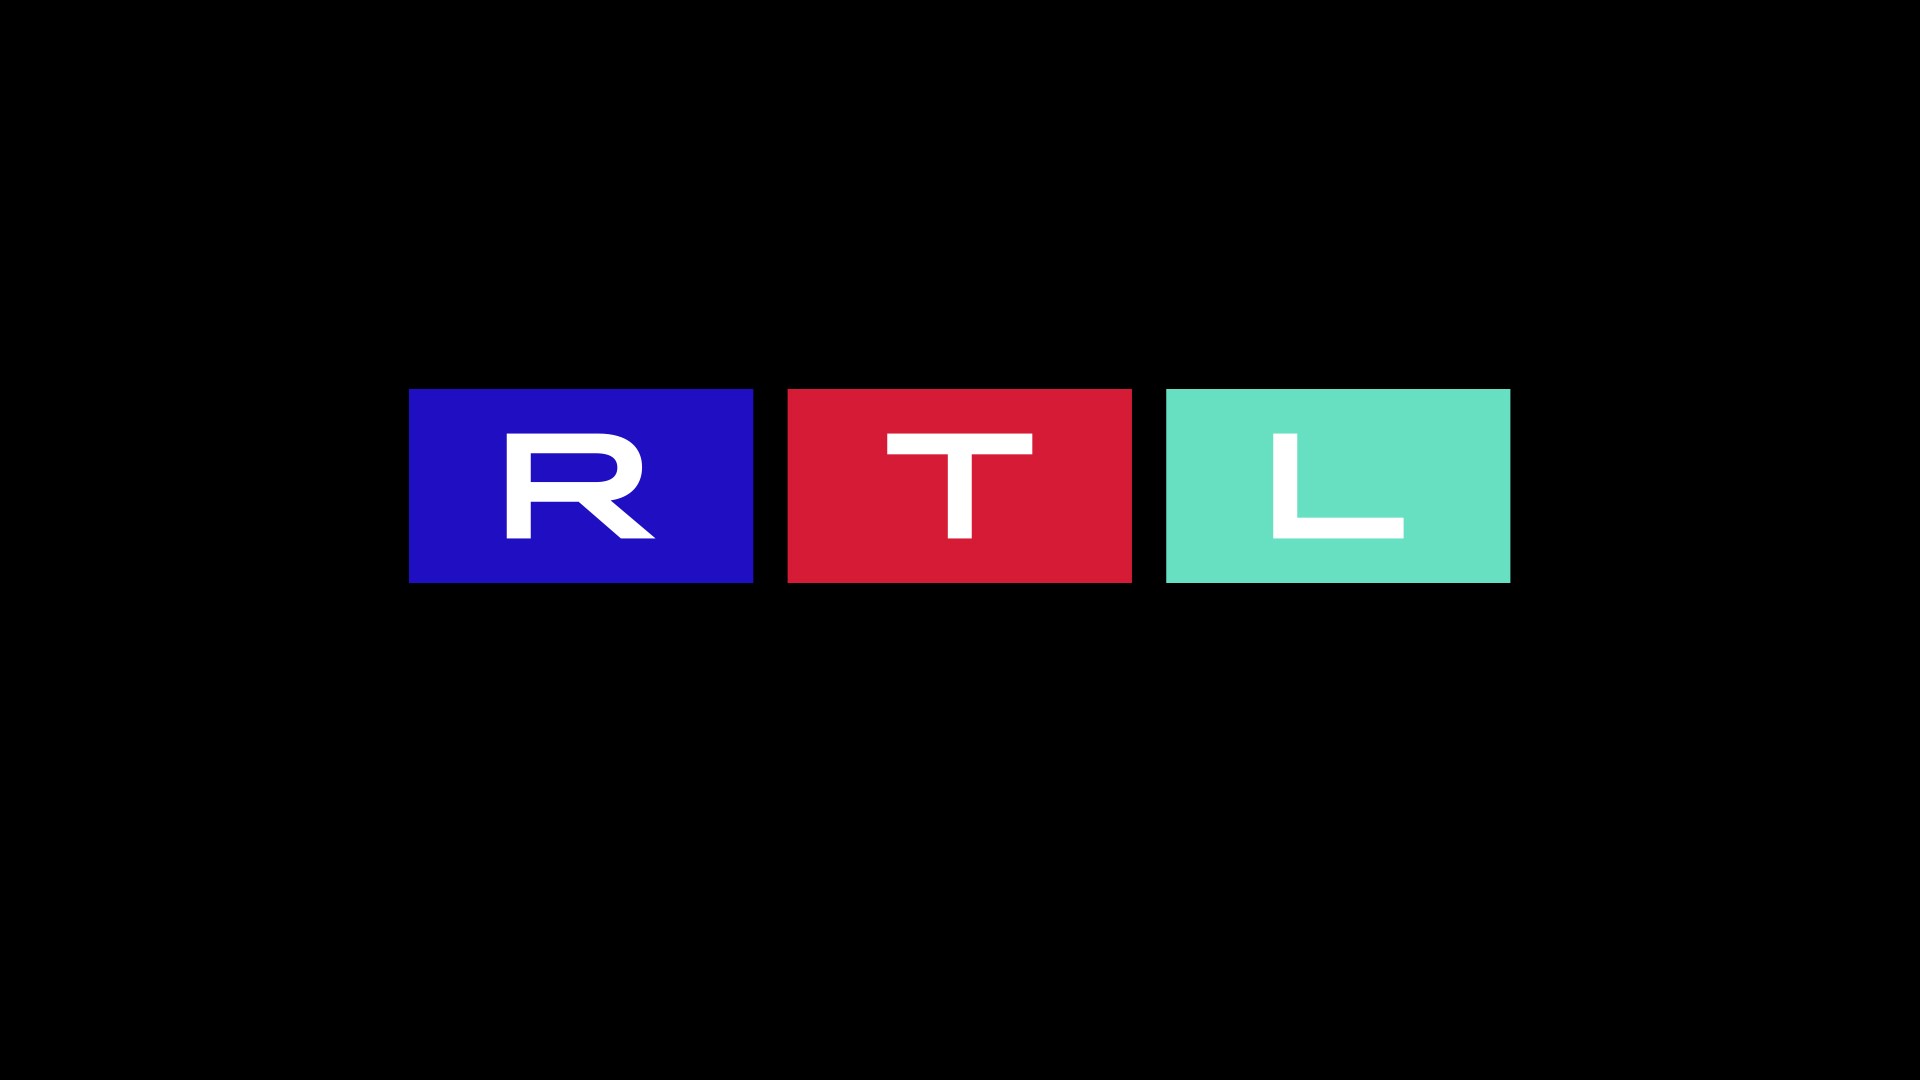 RTL has just announced a program change affecting evening programming, we can say goodbye to the previous format of Fókusz